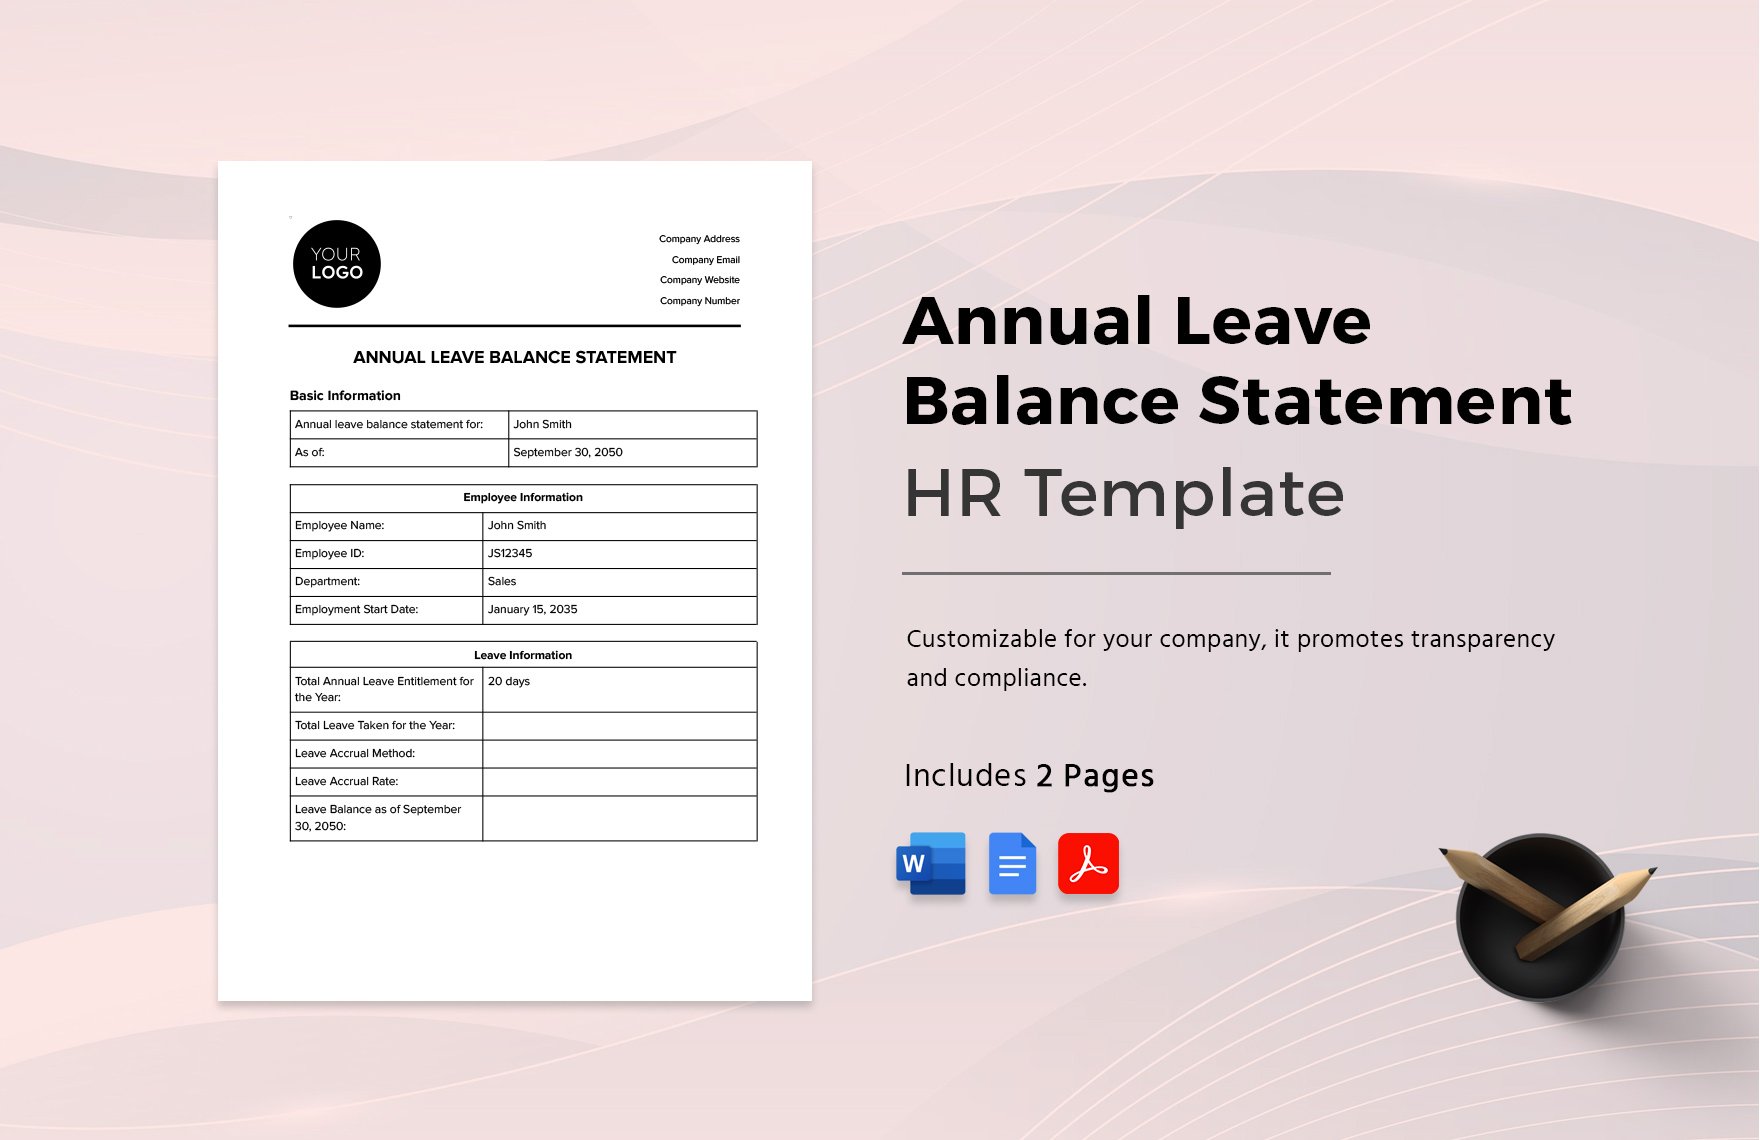 Annual Leave Balance Statement HR Template